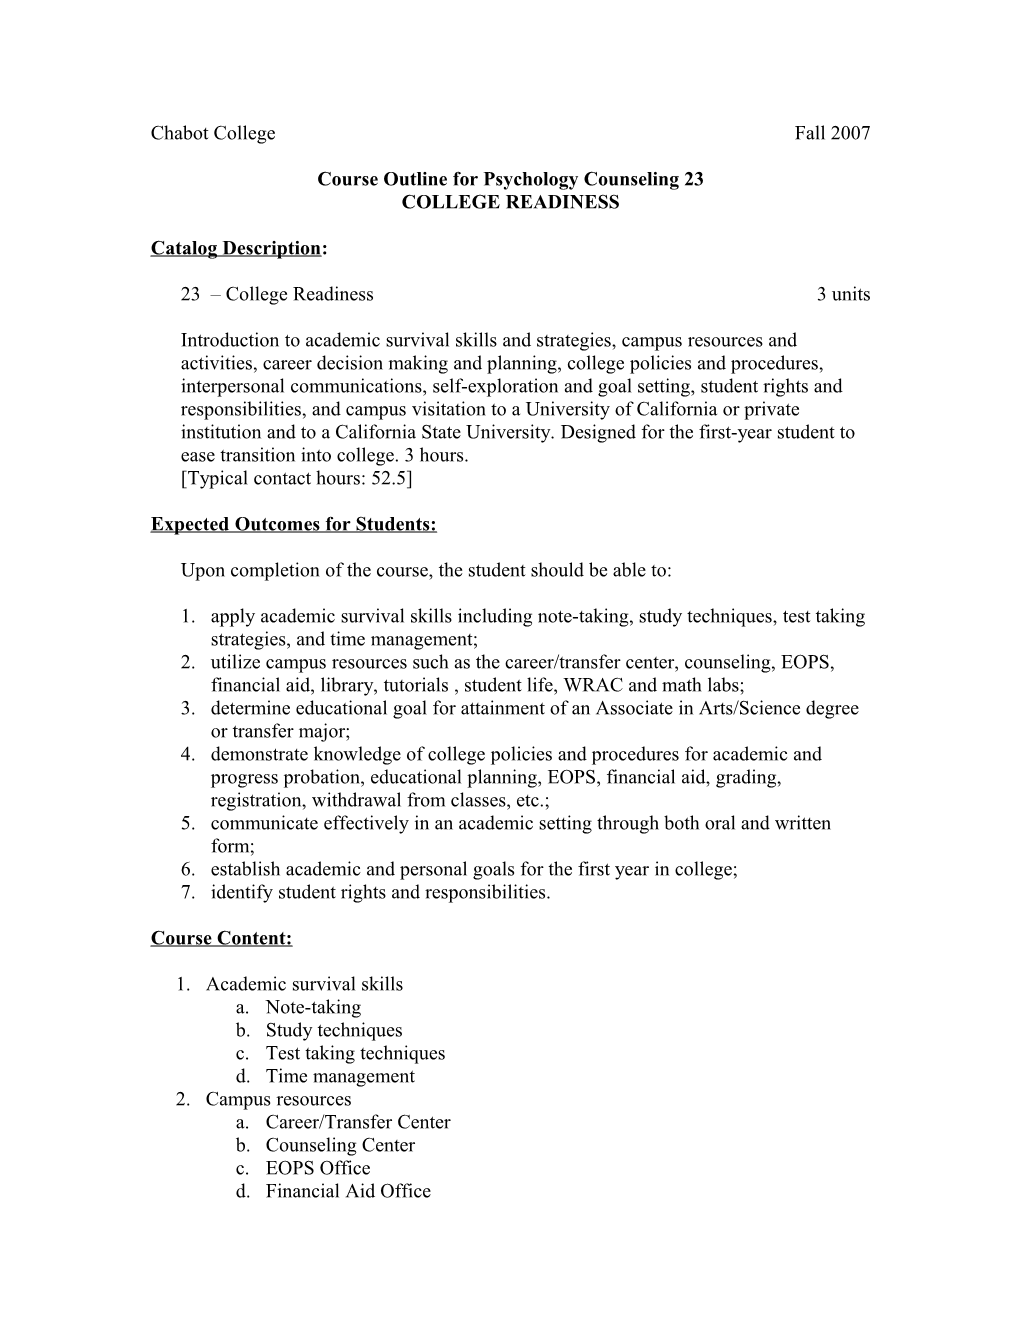 Course Outline for Psychology Counseling 23